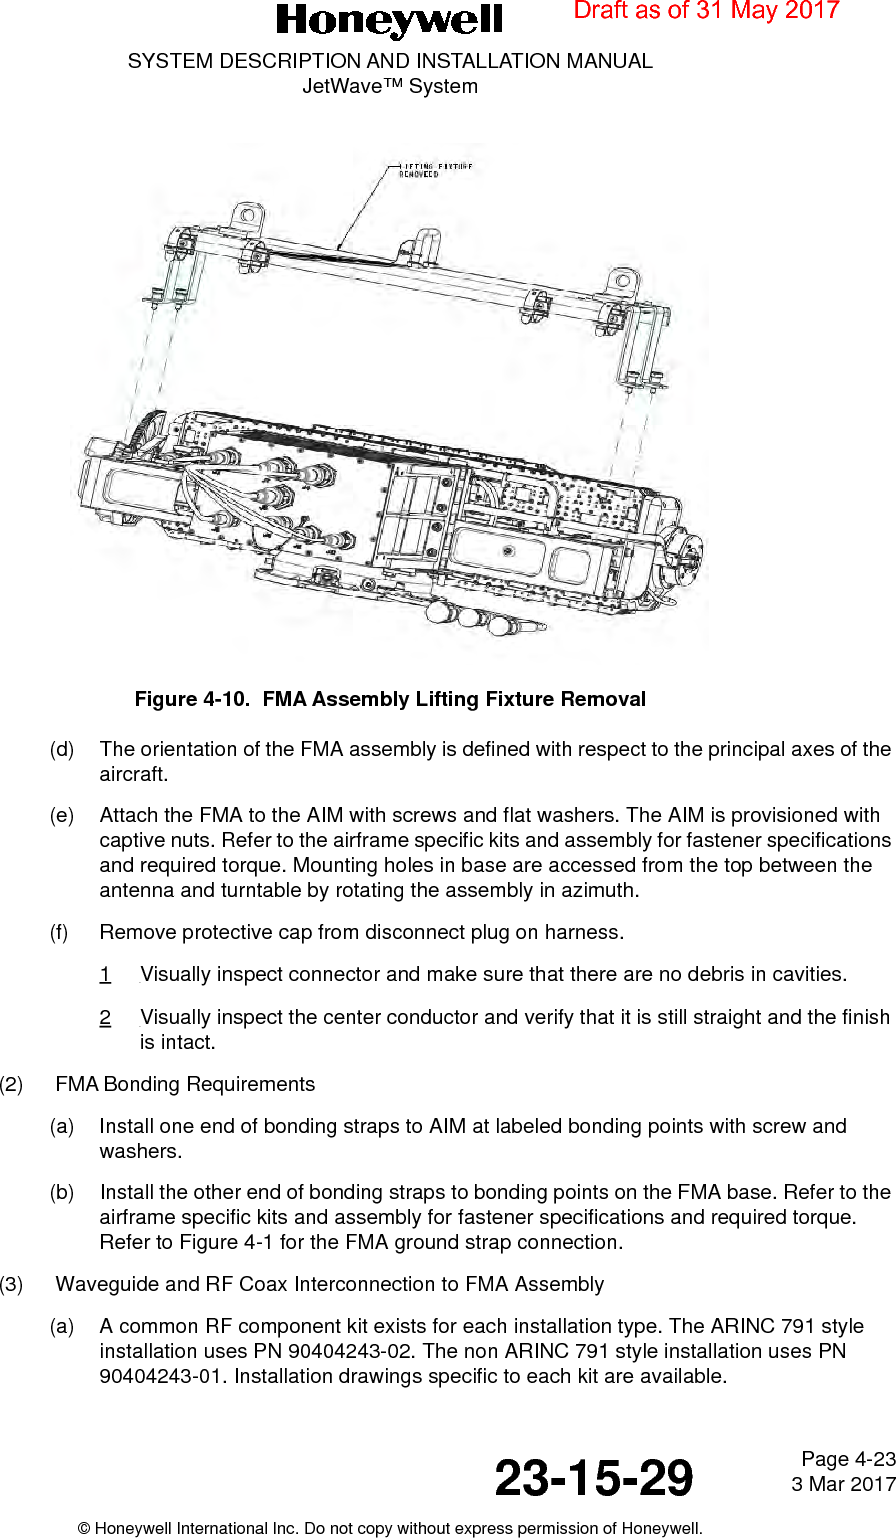 Page 4-23 3 Mar 201723-15-29SYSTEM DESCRIPTION AND INSTALLATION MANUALJetWave™ System© Honeywell International Inc. Do not copy without express permission of Honeywell.Figure 4-10.  FMA Assembly Lifting Fixture Removal (d) The orientation of the FMA assembly is defined with respect to the principal axes of the aircraft. (e) Attach the FMA to the AIM with screws and flat washers. The AIM is provisioned with captive nuts. Refer to the airframe specific kits and assembly for fastener specifications and required torque. Mounting holes in base are accessed from the top between the antenna and turntable by rotating the assembly in azimuth.(f) Remove protective cap from disconnect plug on harness. 1Visually inspect connector and make sure that there are no debris in cavities.2Visually inspect the center conductor and verify that it is still straight and the finish is intact. (2) FMA Bonding Requirements(a) Install one end of bonding straps to AIM at labeled bonding points with screw and washers. (b) Install the other end of bonding straps to bonding points on the FMA base. Refer to the airframe specific kits and assembly for fastener specifications and required torque. Refer to Figure 4-1 for the FMA ground strap connection. (3) Waveguide and RF Coax Interconnection to FMA Assembly(a) A common RF component kit exists for each installation type. The ARINC 791 style installation uses PN 90404243-02. The non ARINC 791 style installation uses PN 90404243-01. Installation drawings specific to each kit are available. Draft as of 31 May 2017